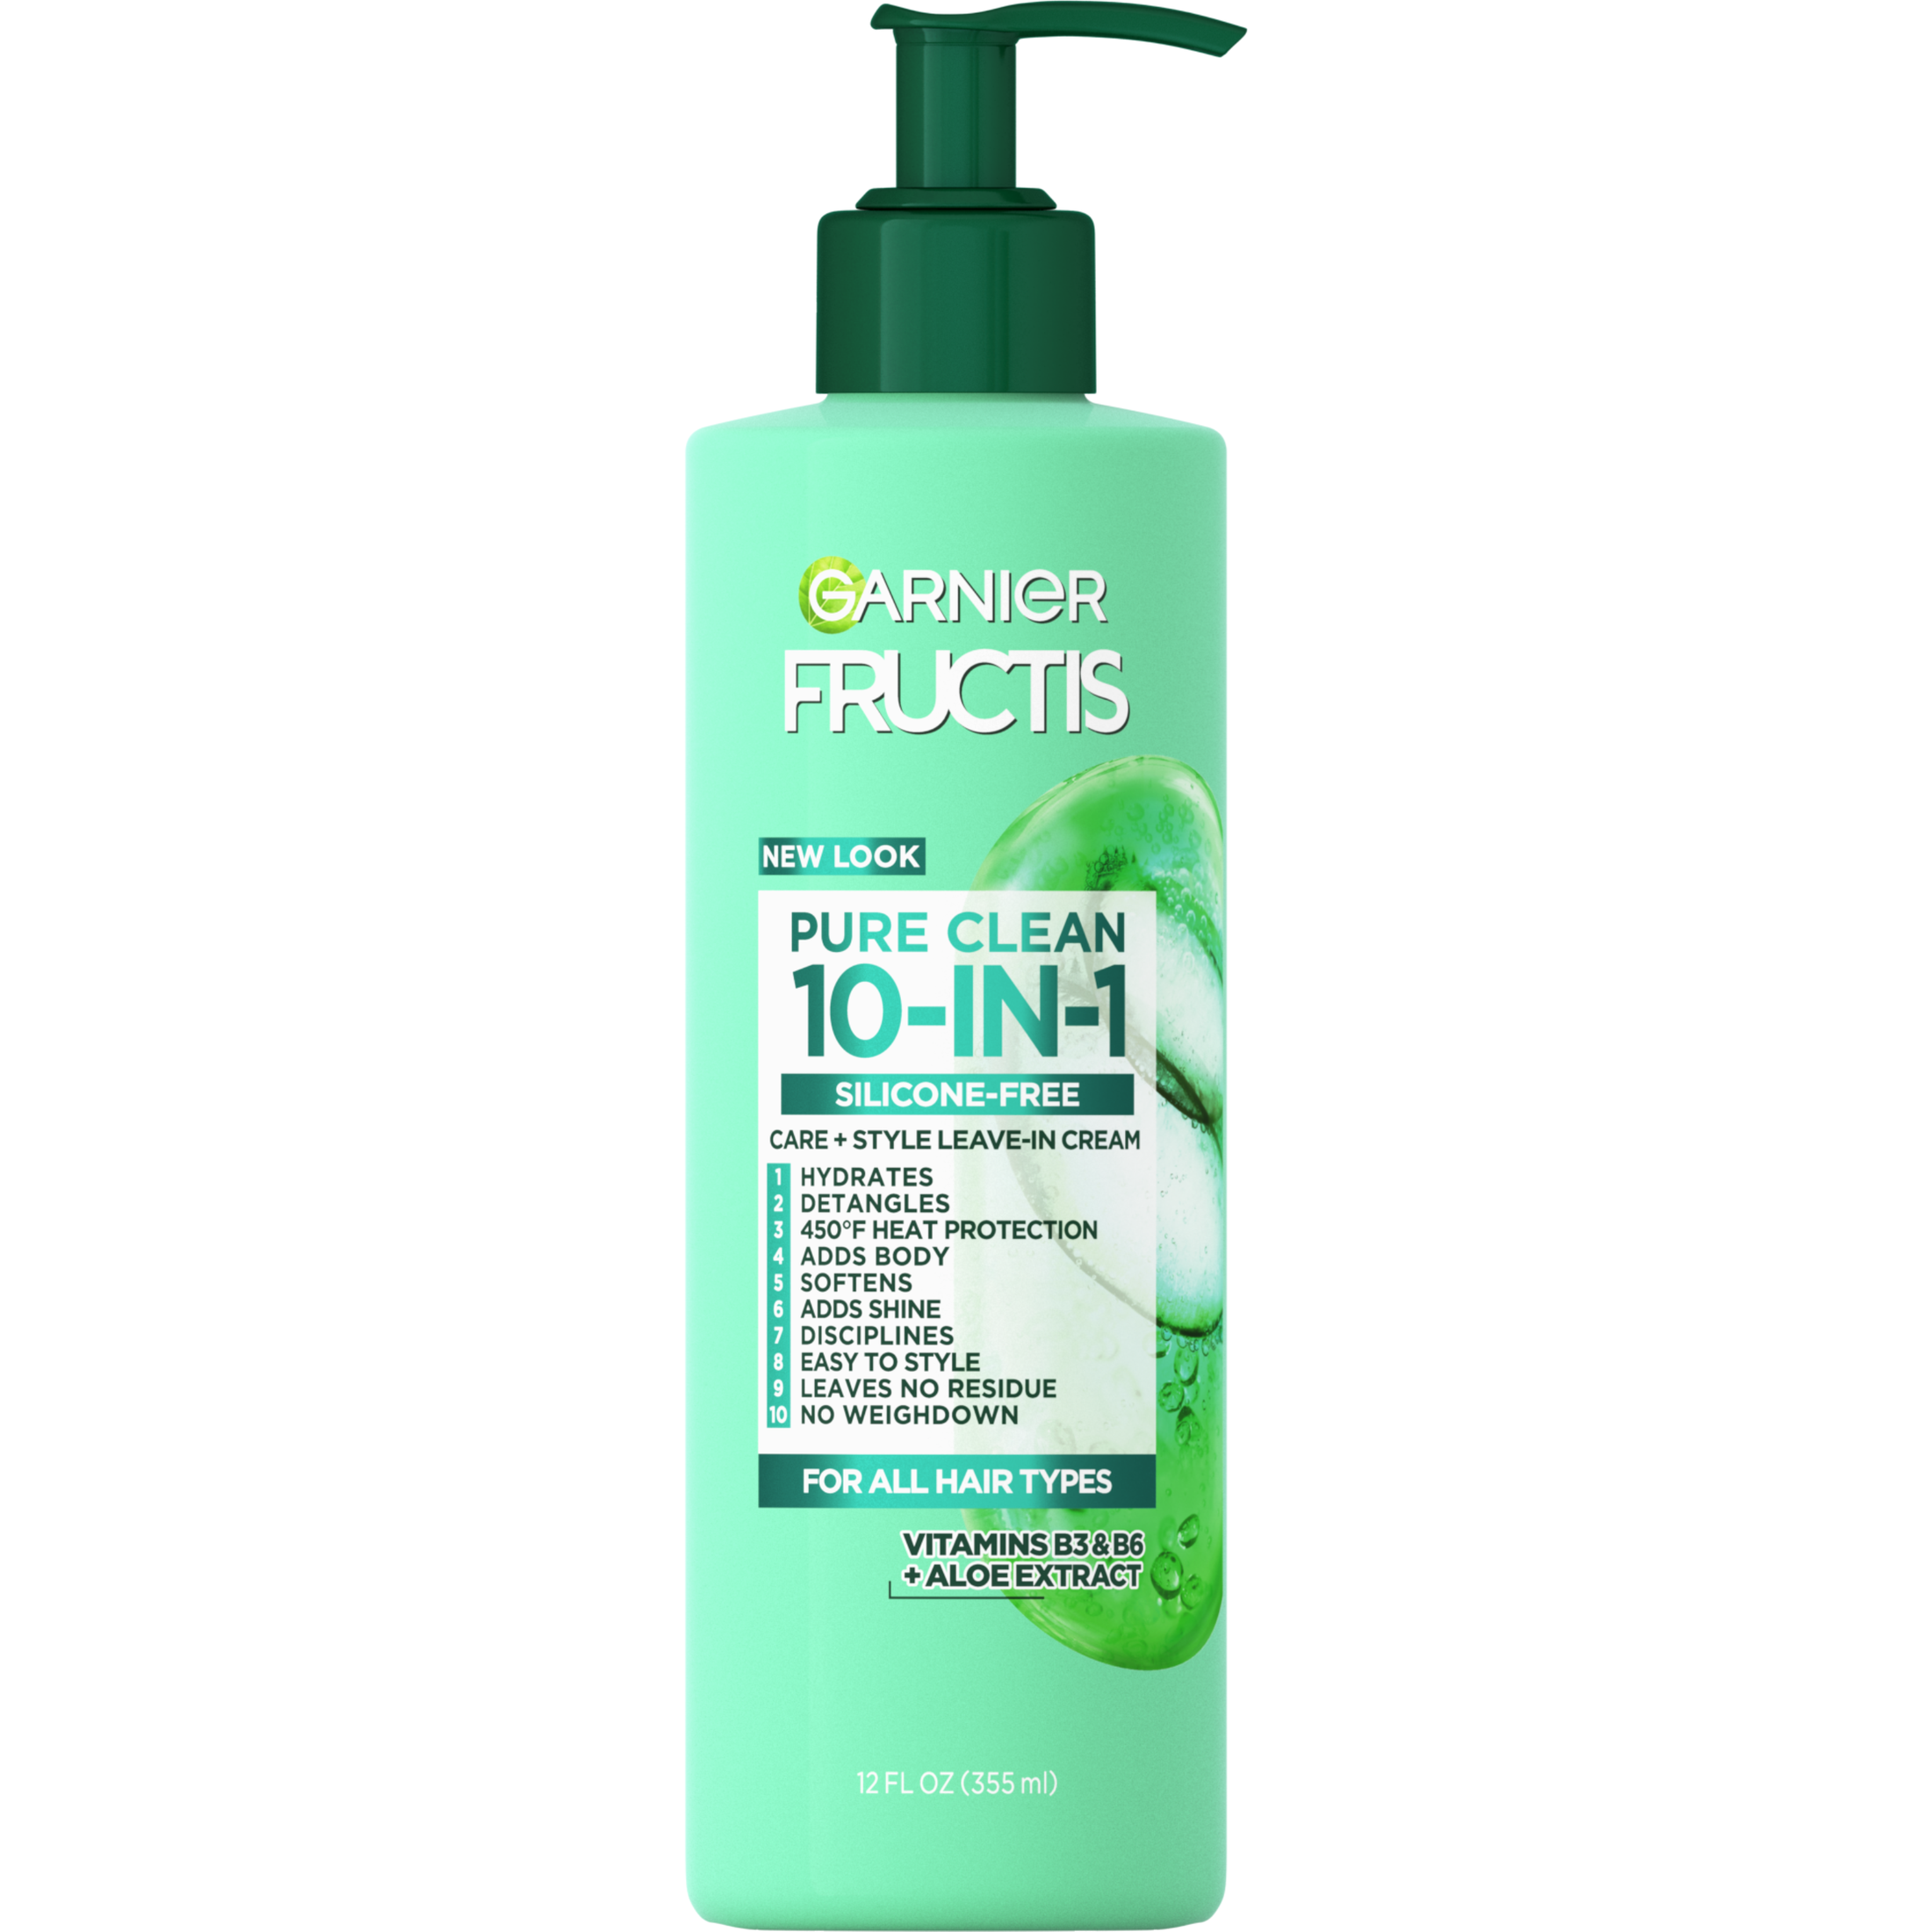 Garnier Fructis Pure Clean 10-in-1 Care and Styling Leave In Cream, 12 fl oz - image 1 of 9